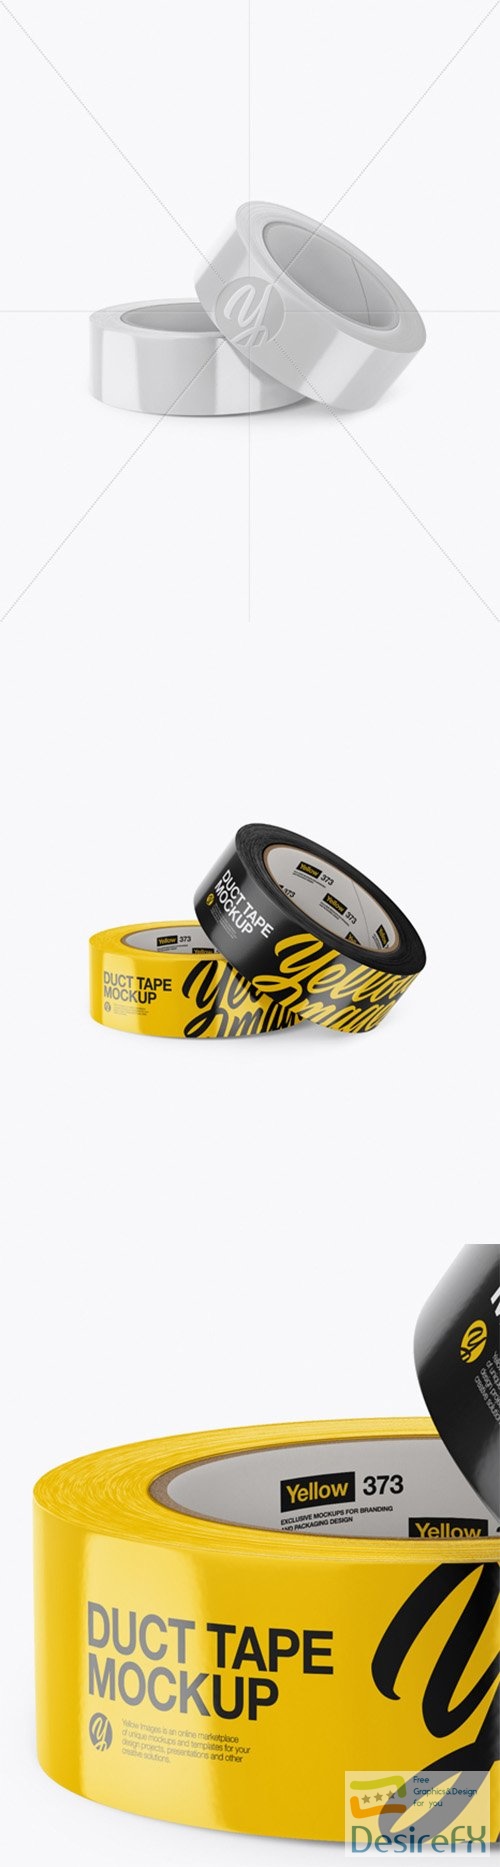 Two Glossy Duct Tape Rolls Mockup 24153 TIF